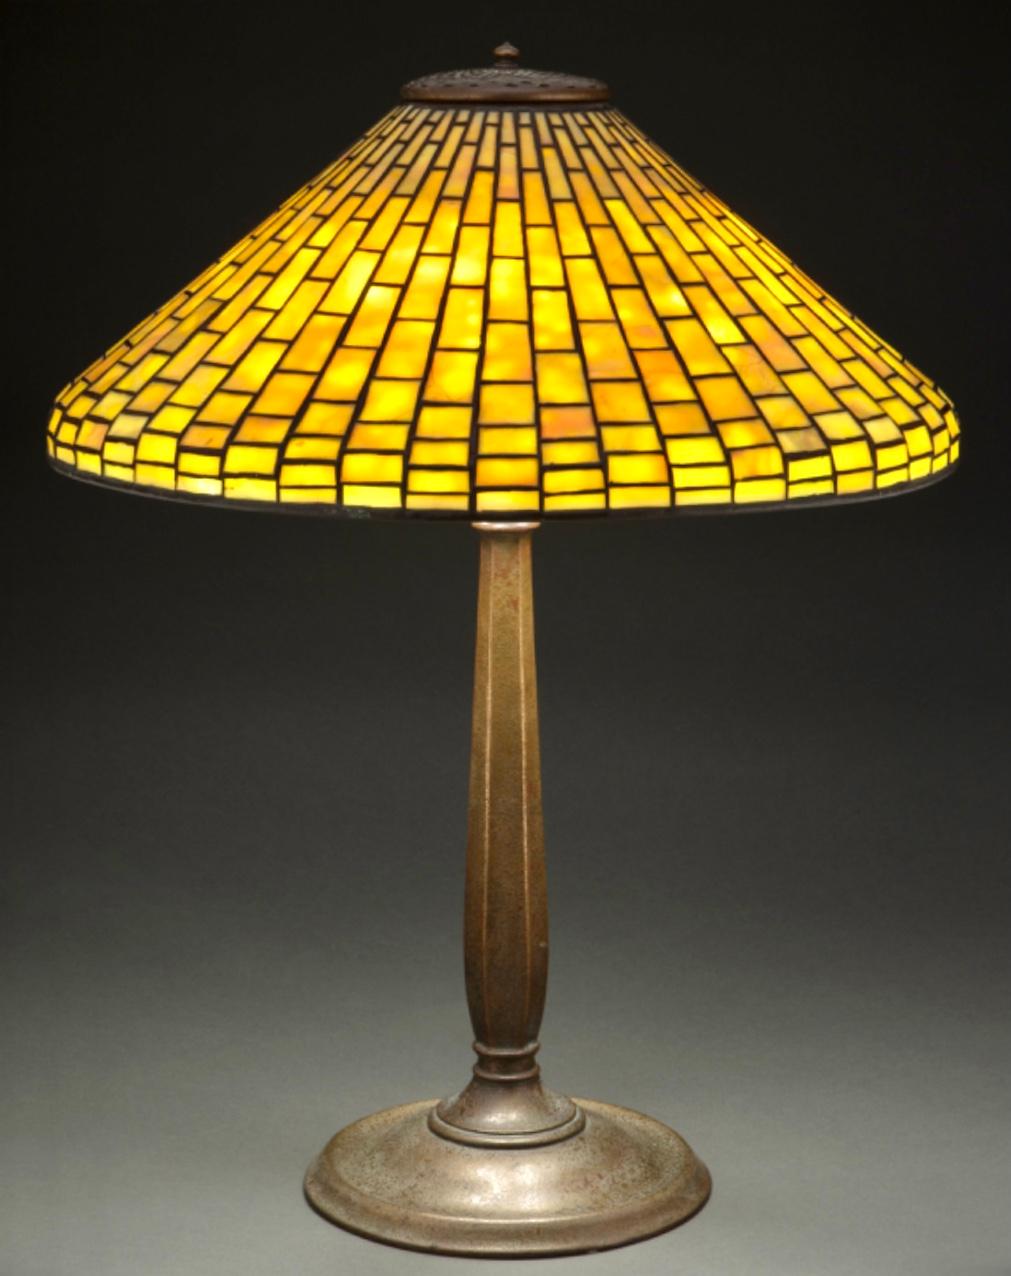 Tiffany Studios Leaded Glass and Patinated Bronze Geometric Table Lamp, circa 1910. Art nouveau classic wit Art Deco design. Attractive orange peel texture with light gilding and red coloring bronze base crowned be a conical geometric leaded and